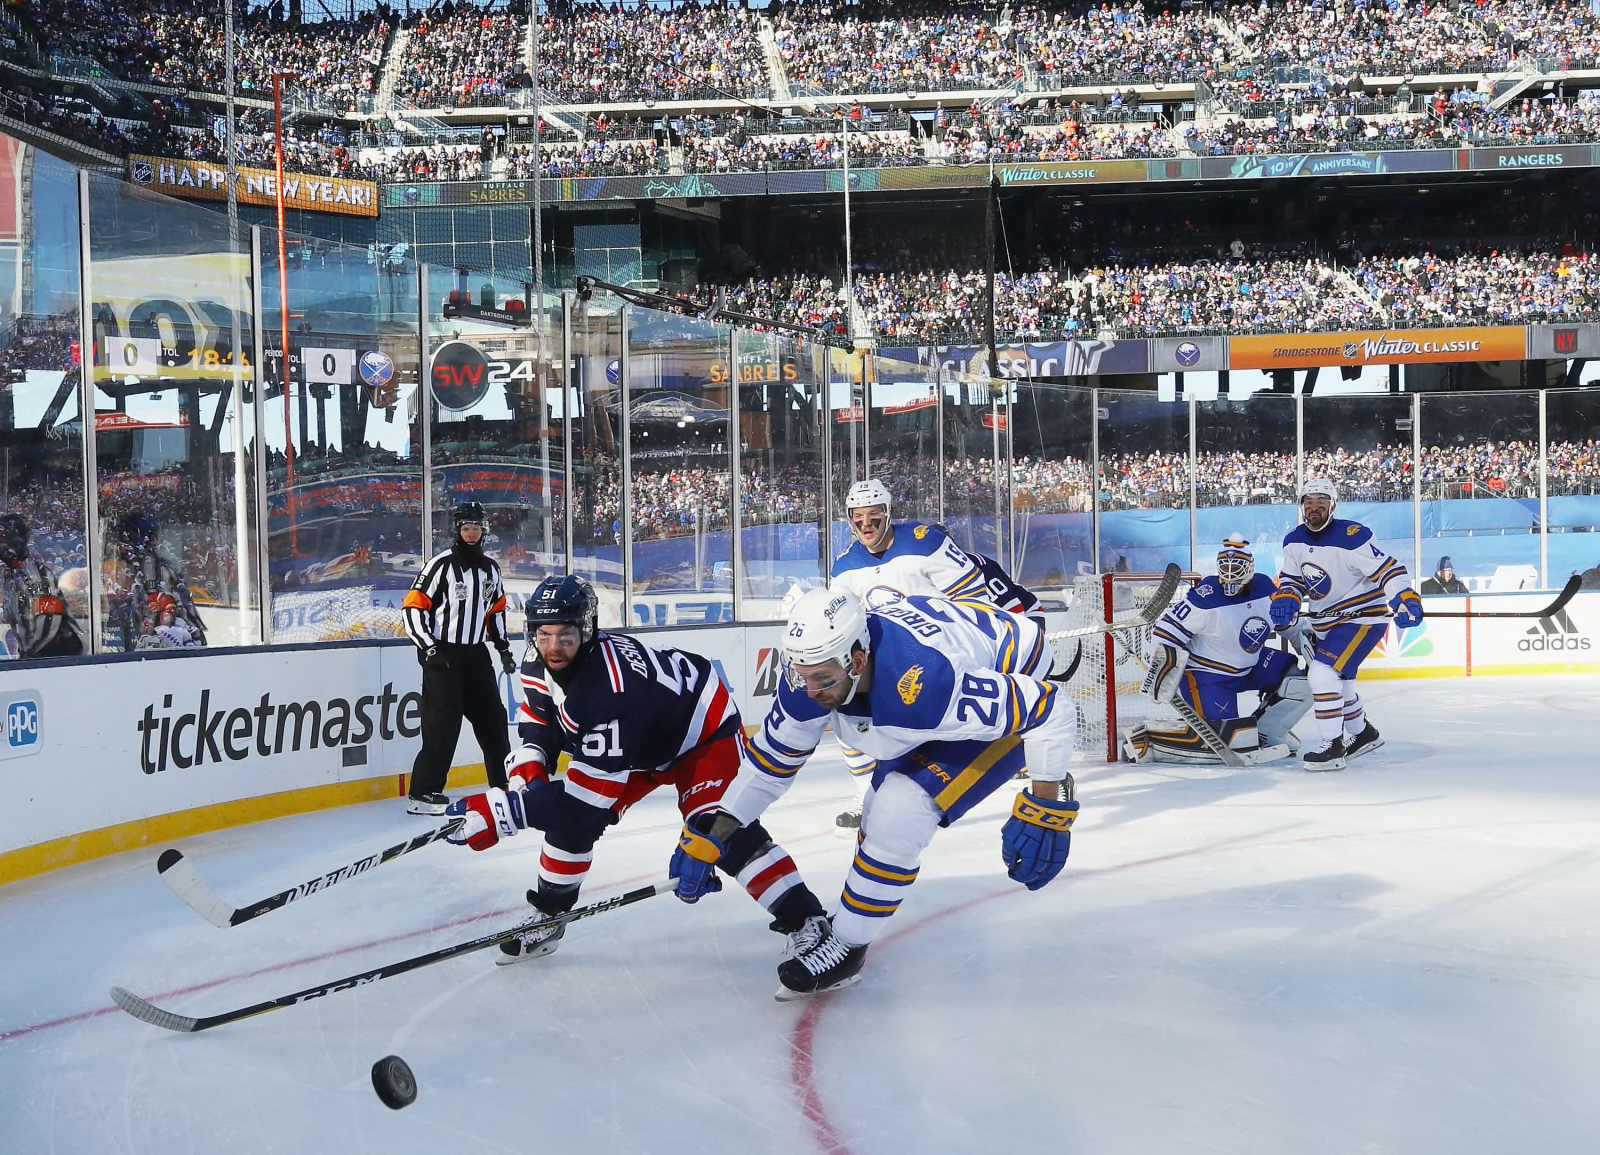 New York Rangers, Buffalo Sabres, Winter Classic: All about the young studs